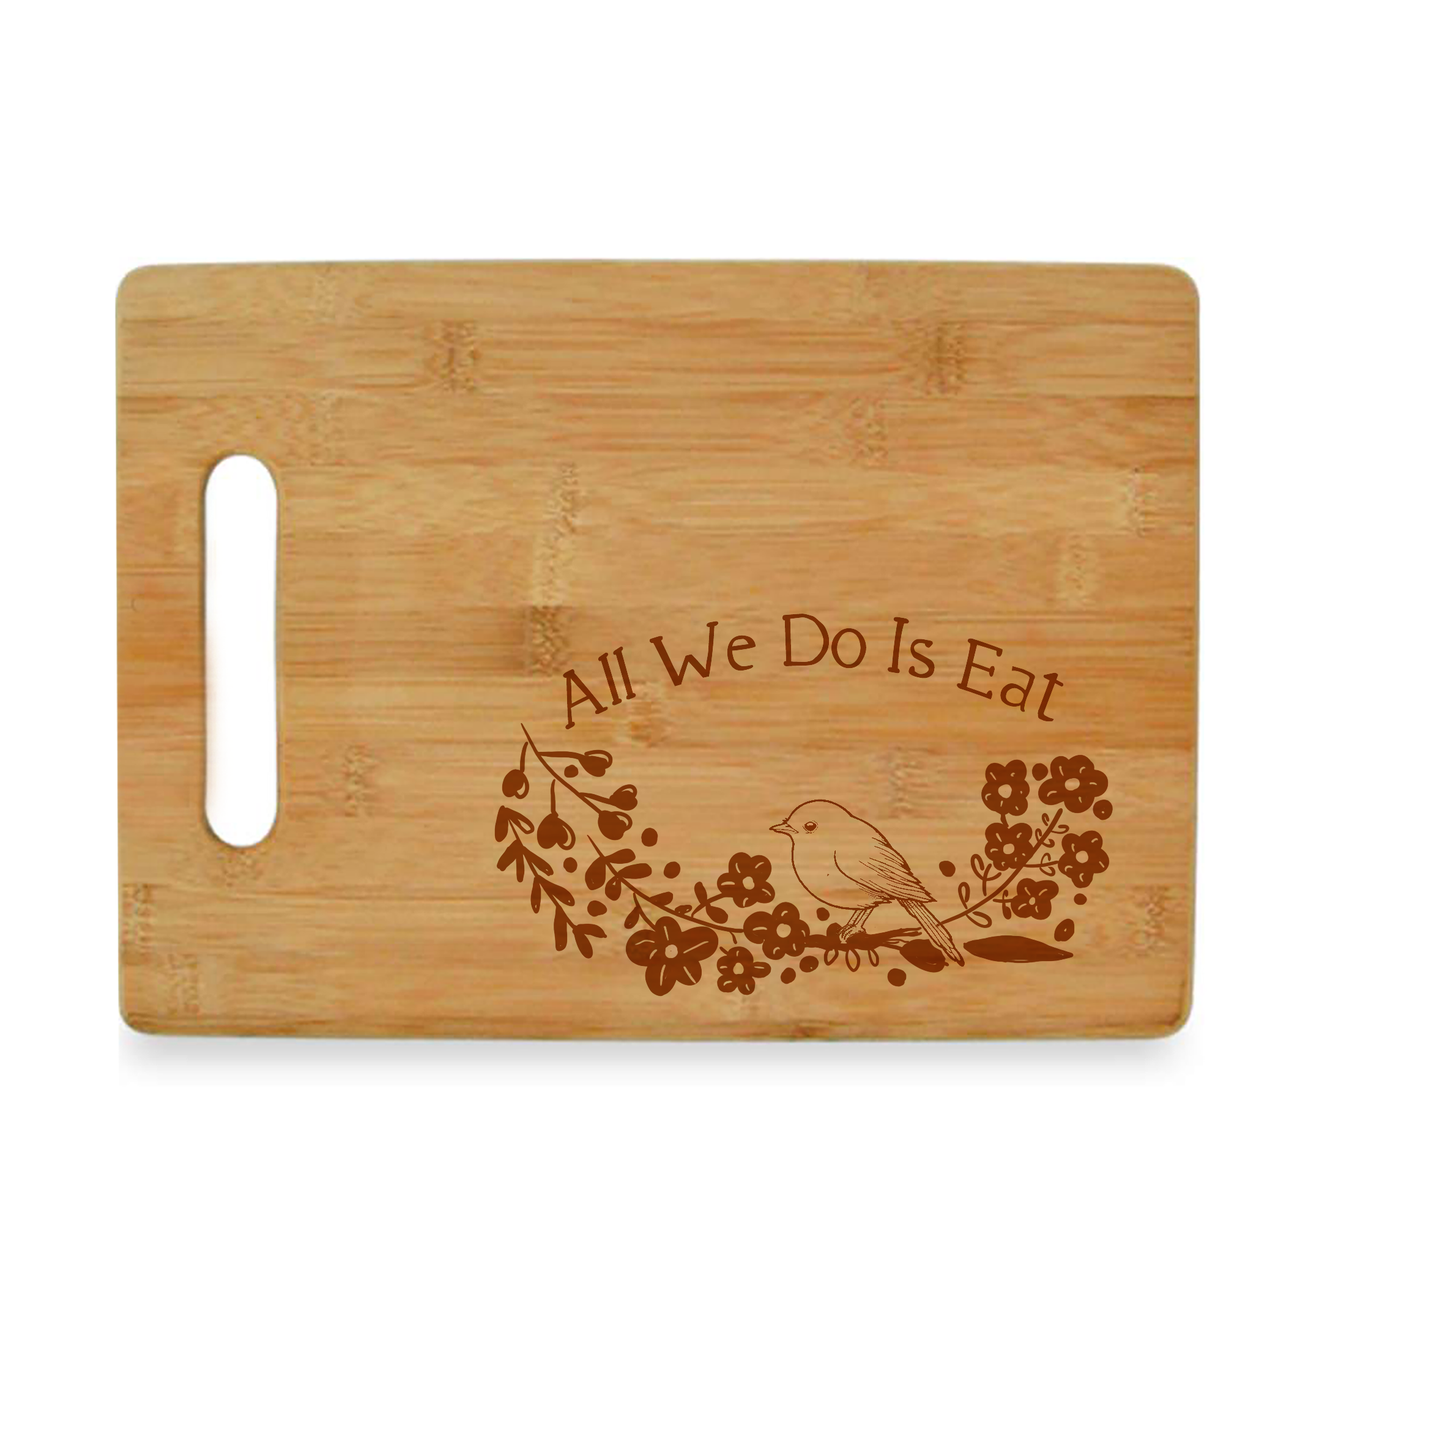 All We Do is Eat - Bamboo Cutting Board